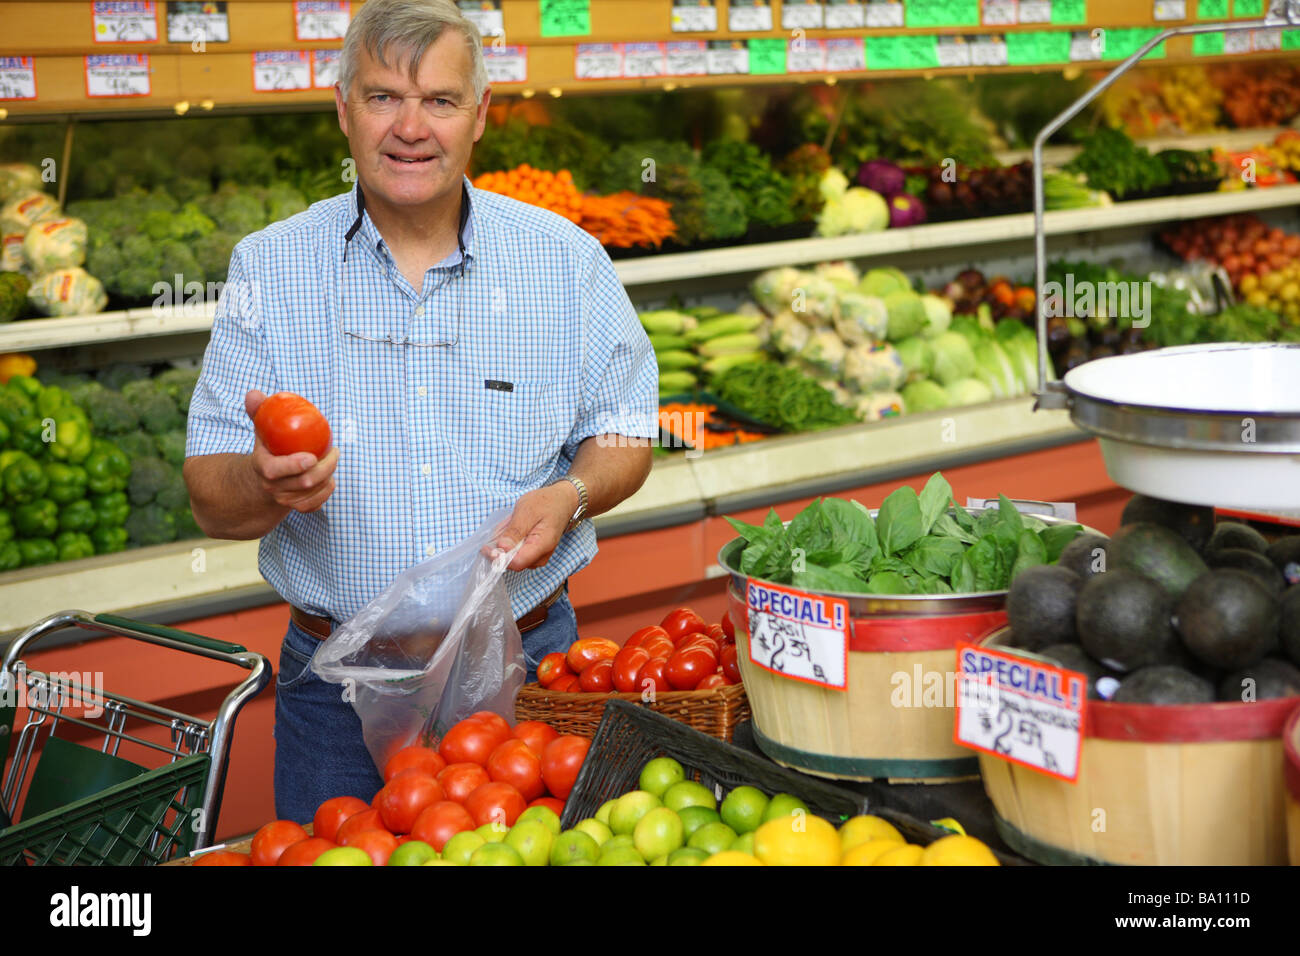 Senior man in grocery store picking out produce Stock Photo